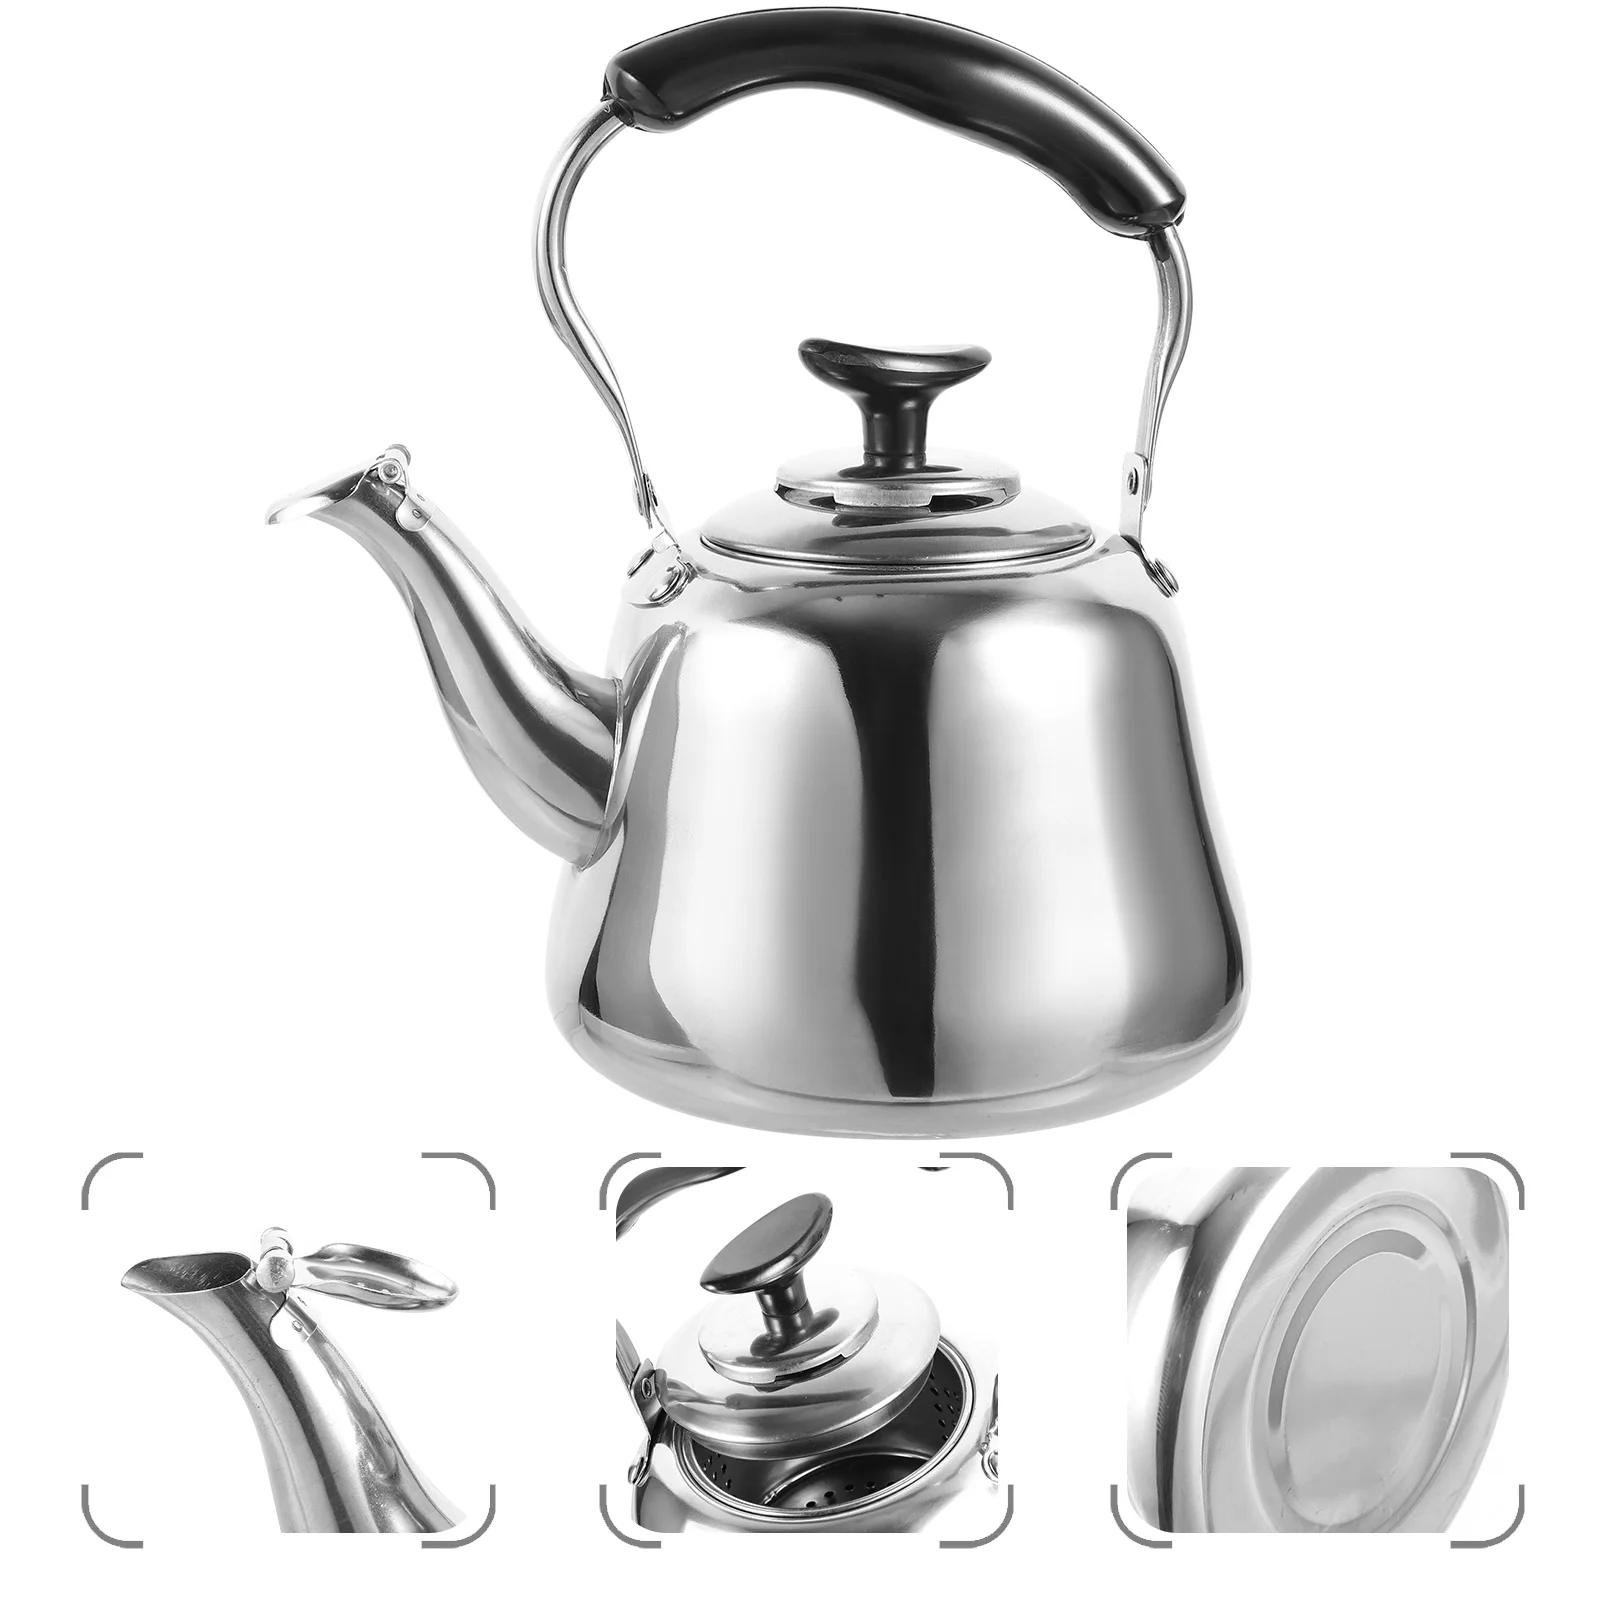 

Chirping Kettle Stainless Steel Heating Water Teakettle Coffee Home Make Household Large Capacity Sounding Home-appliance